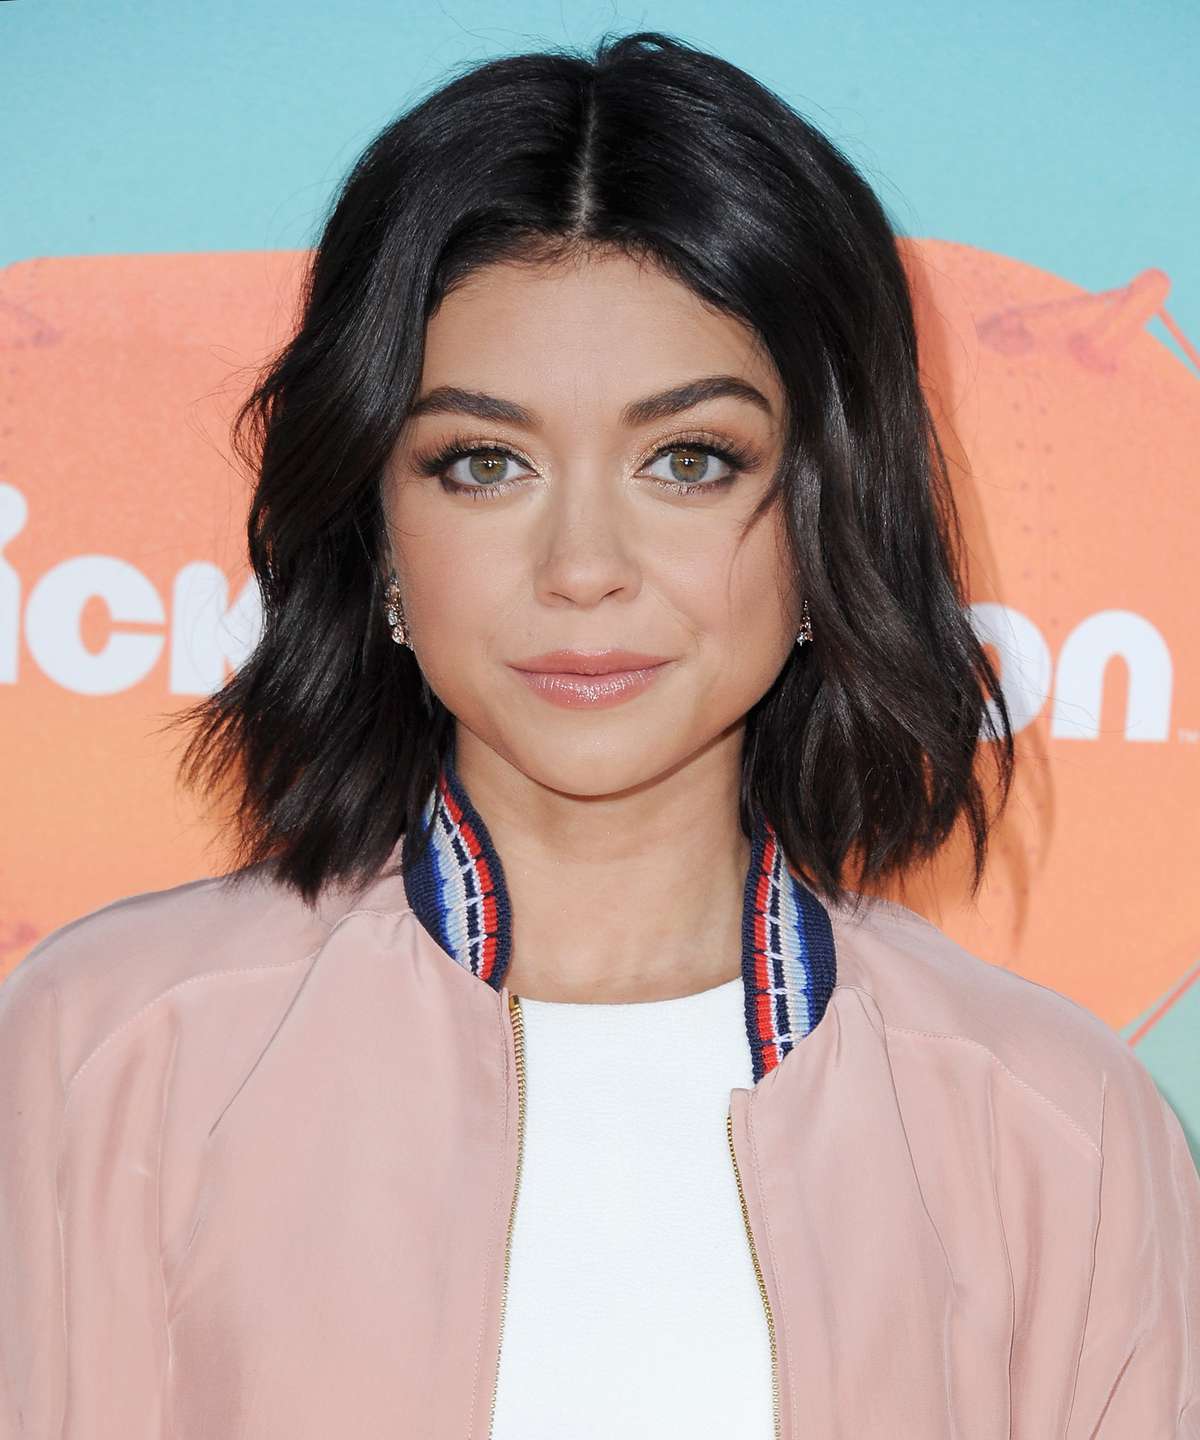 Actress Sarah Hyland arrives at Nickelodeon's 2016 Kids' Choice Awards at The Forum on March 12, 2016 in Inglewood, California.